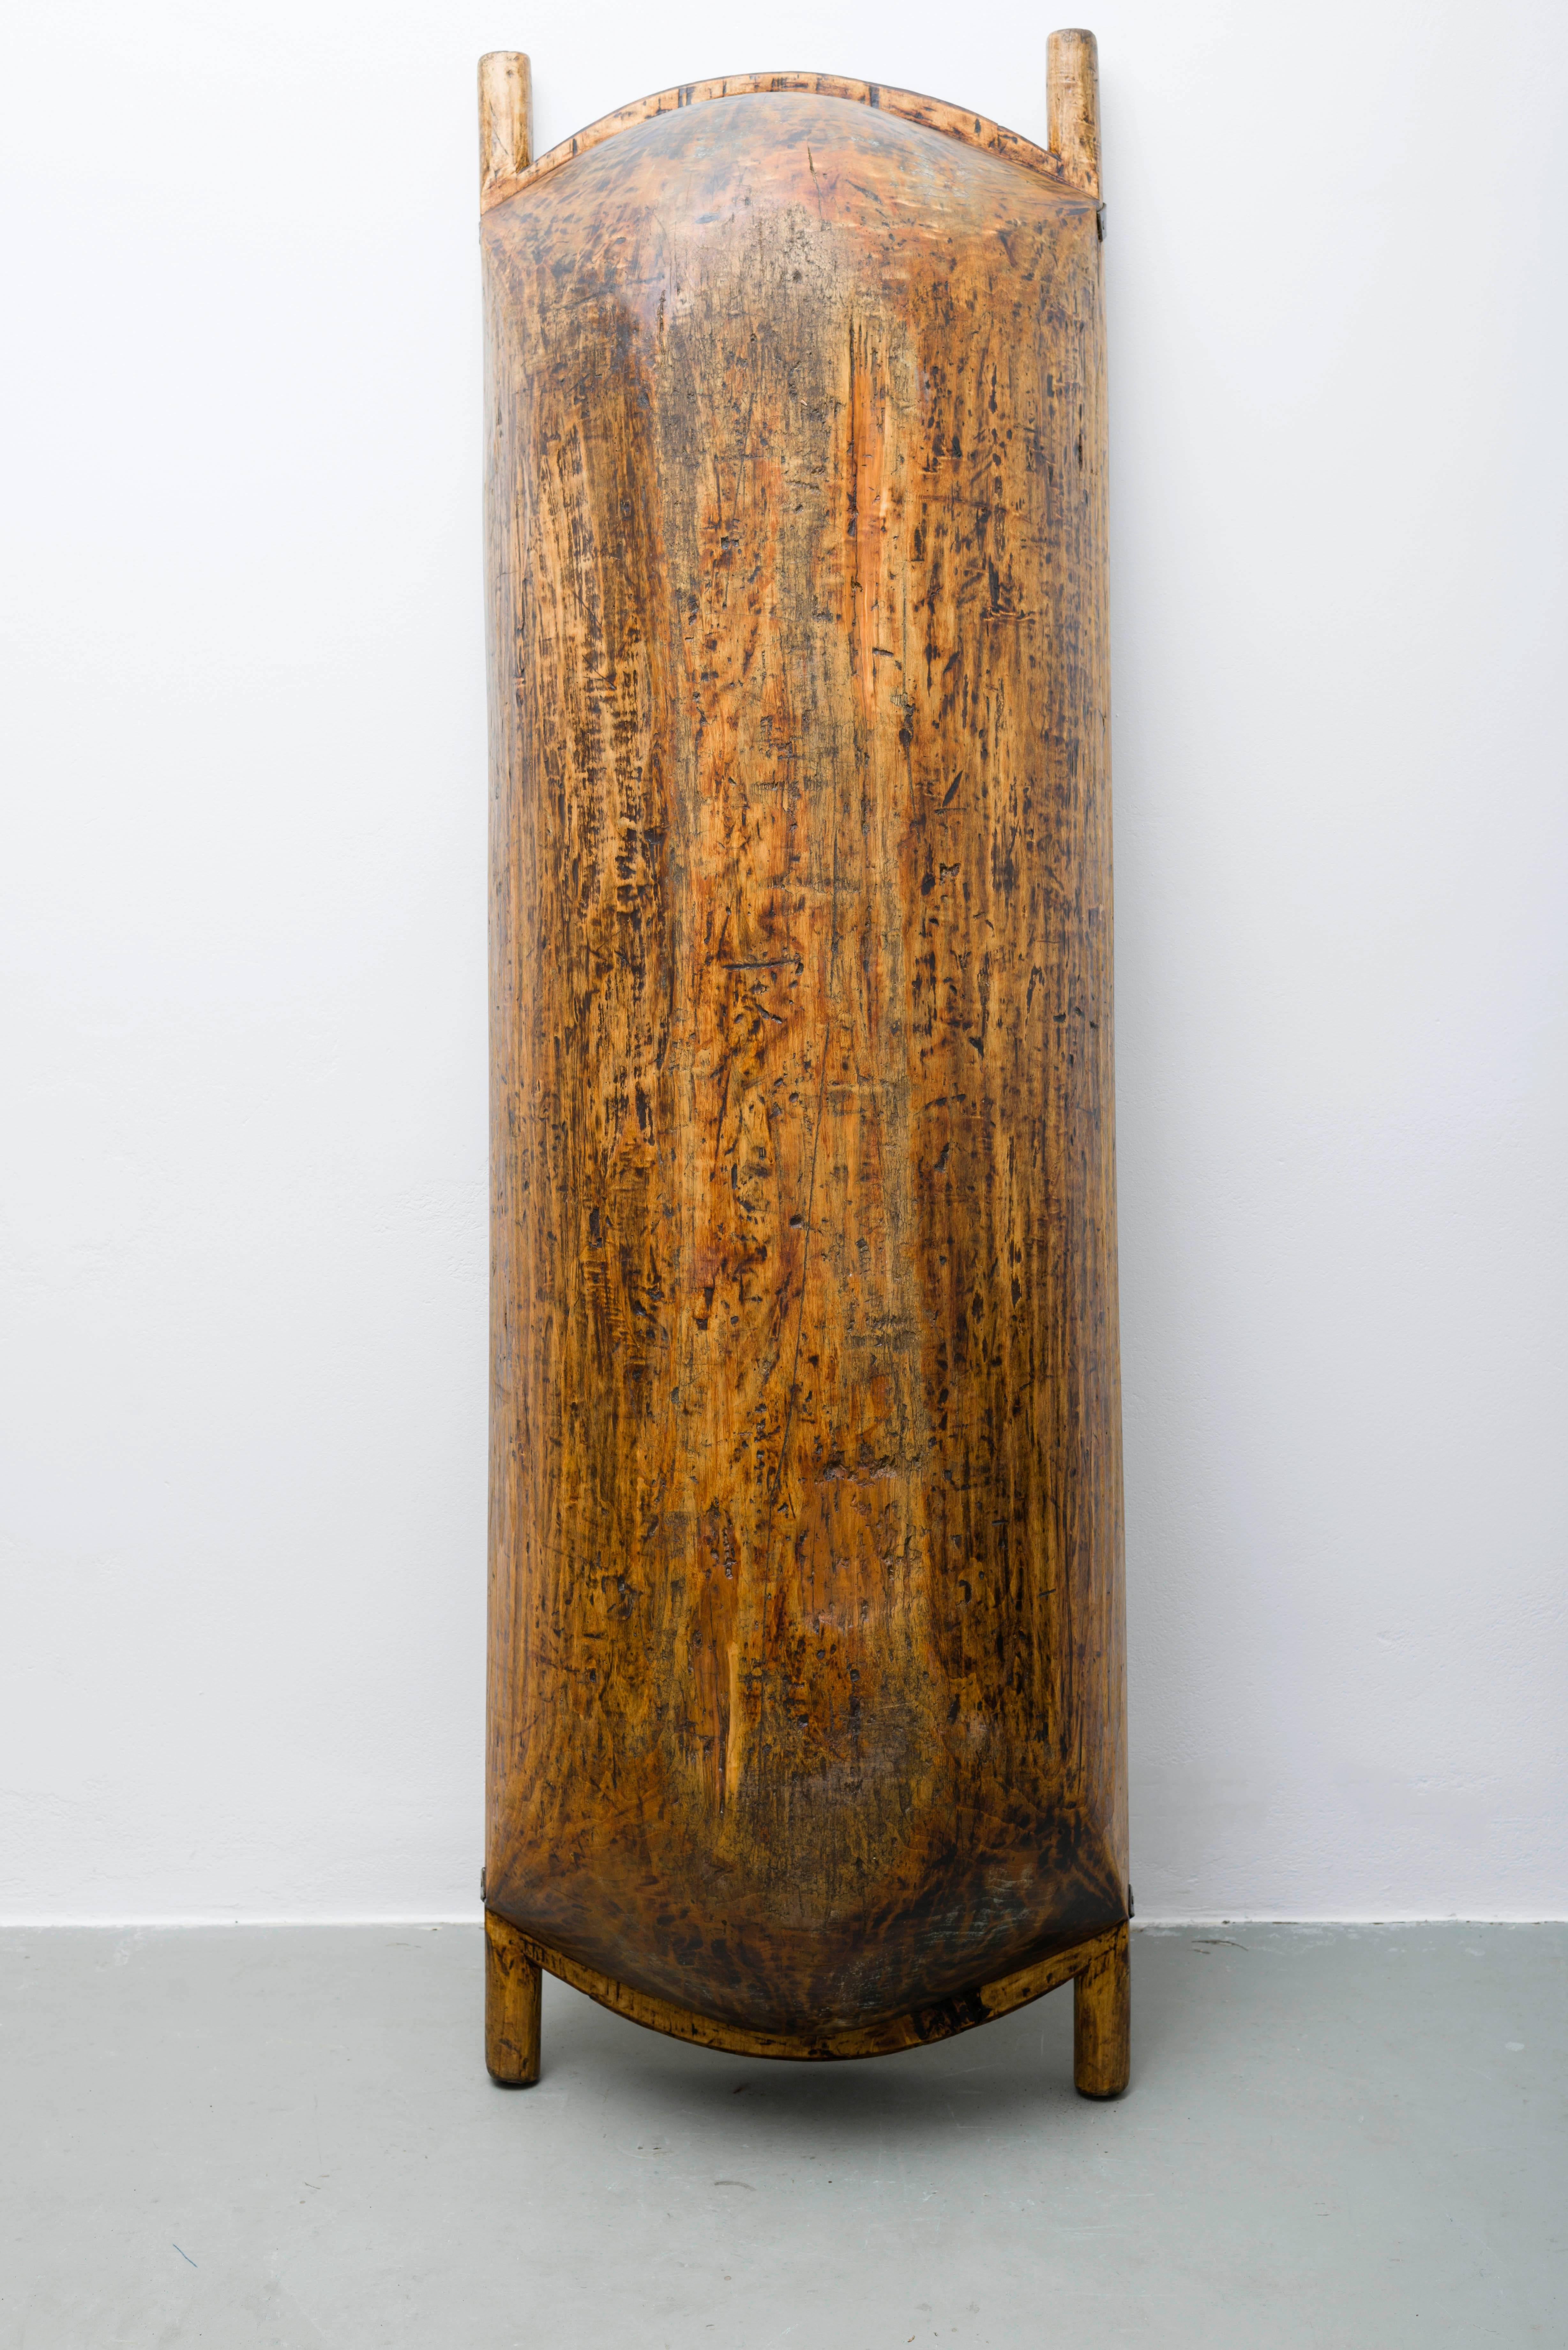 This huge timber trog was built at the beginning of our century in the former Czechoslovakia produced. Very decorative for storing firewood,
or simply as an object.
Wonderful old handicraft work from a large tree trunk.
The trog has been fully